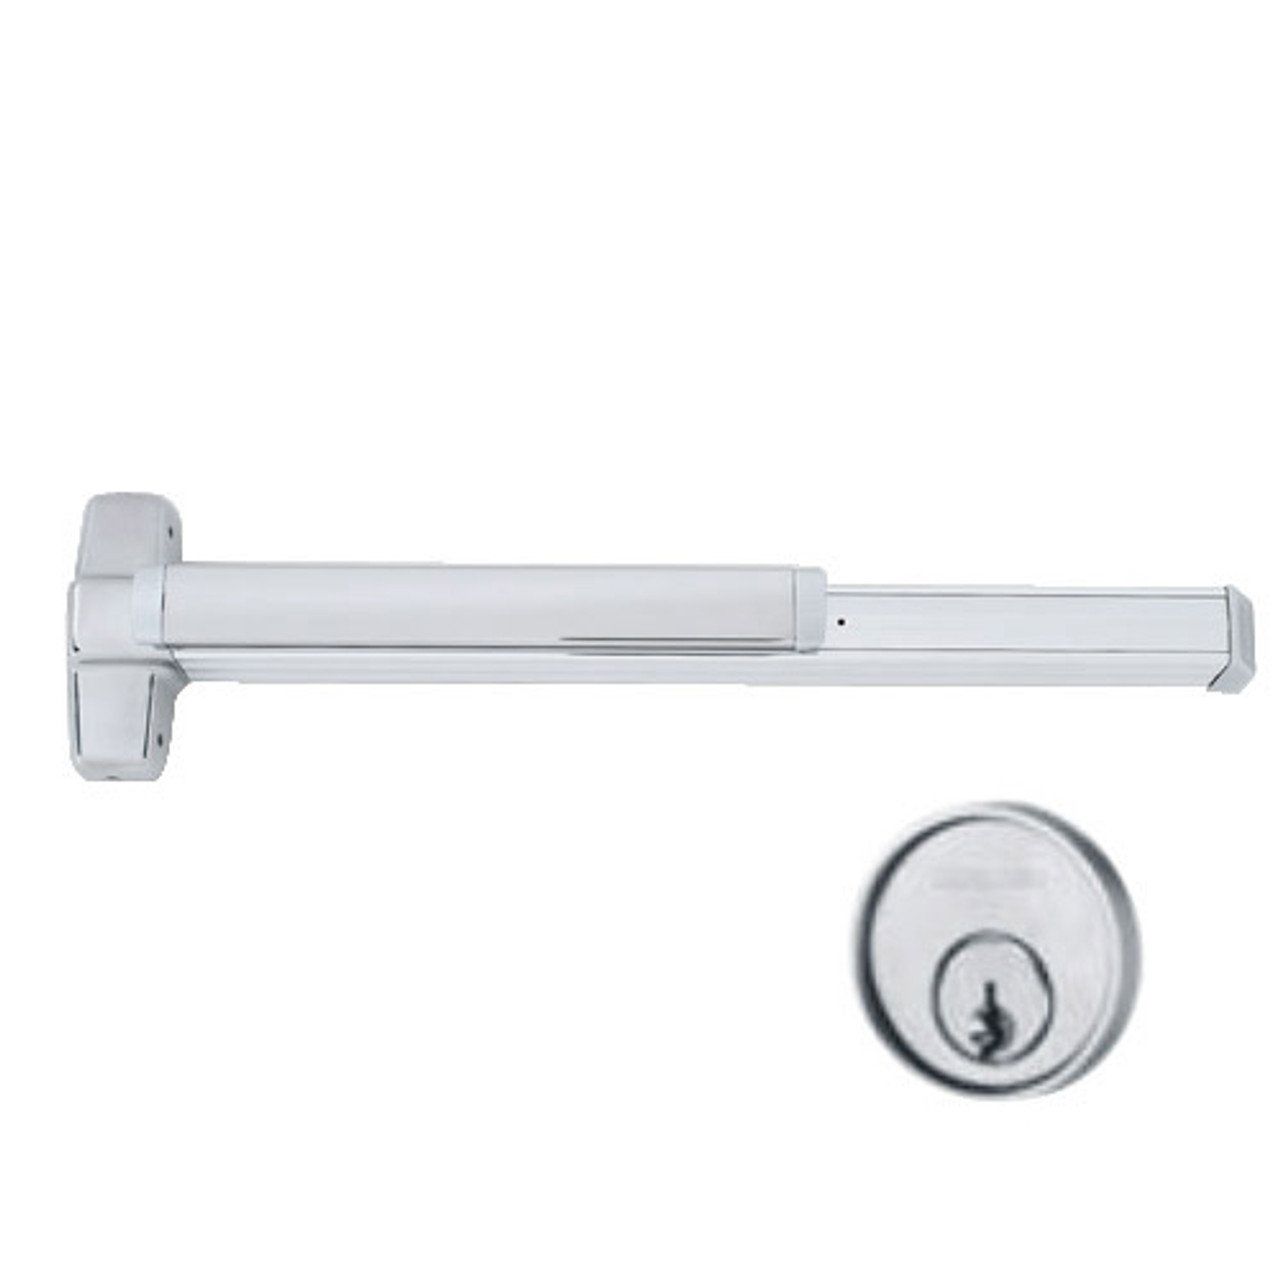 9948NL-OP-F-US28-2 Von Duprin Exit Device in Anodized Aluminum